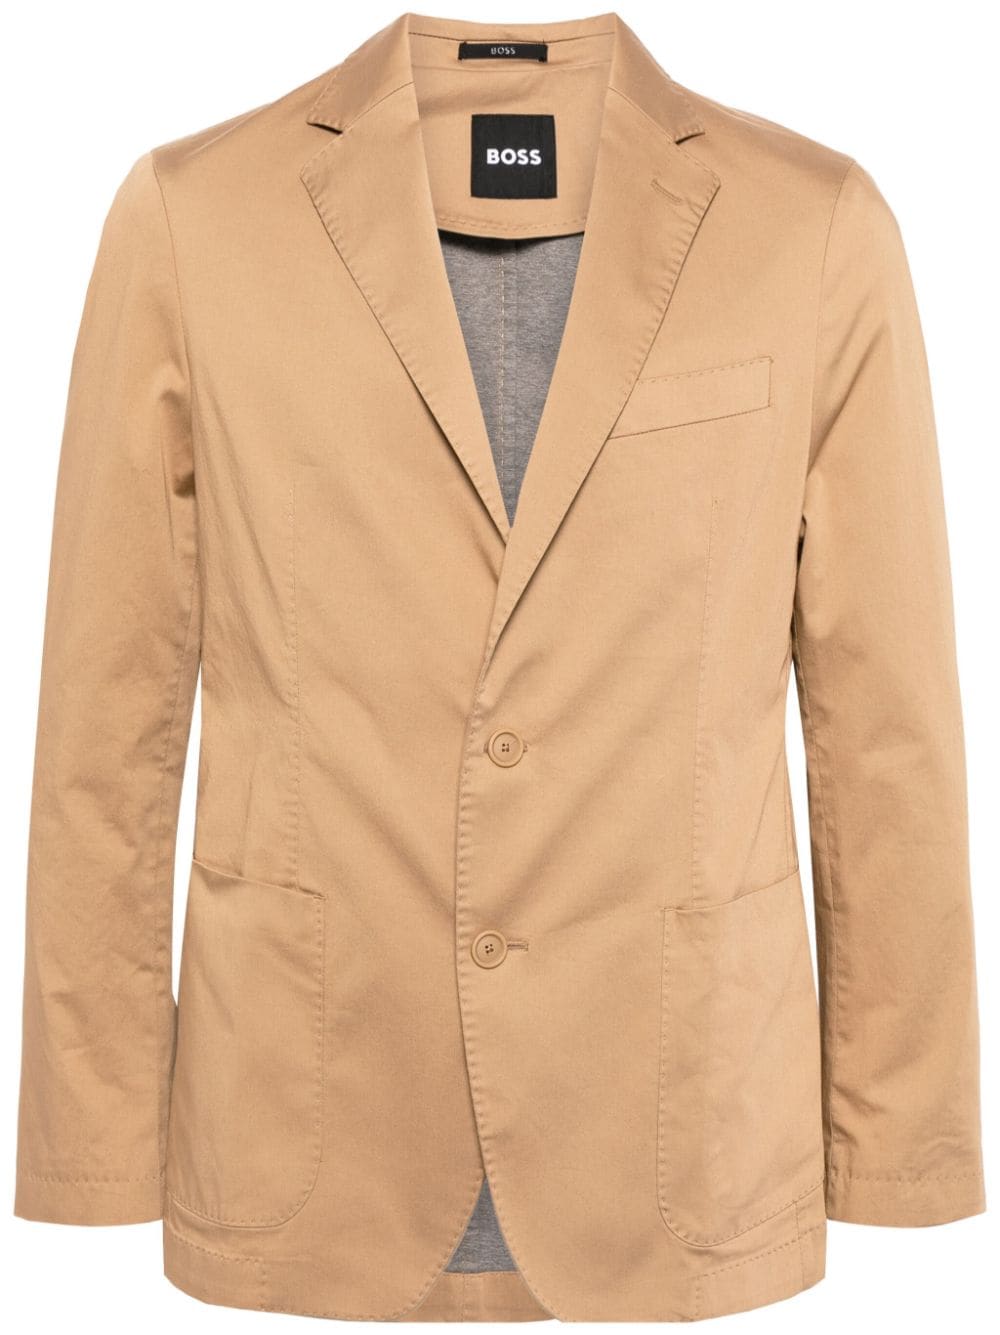 Image 1 of BOSS single-breasted cotton-blend blazer